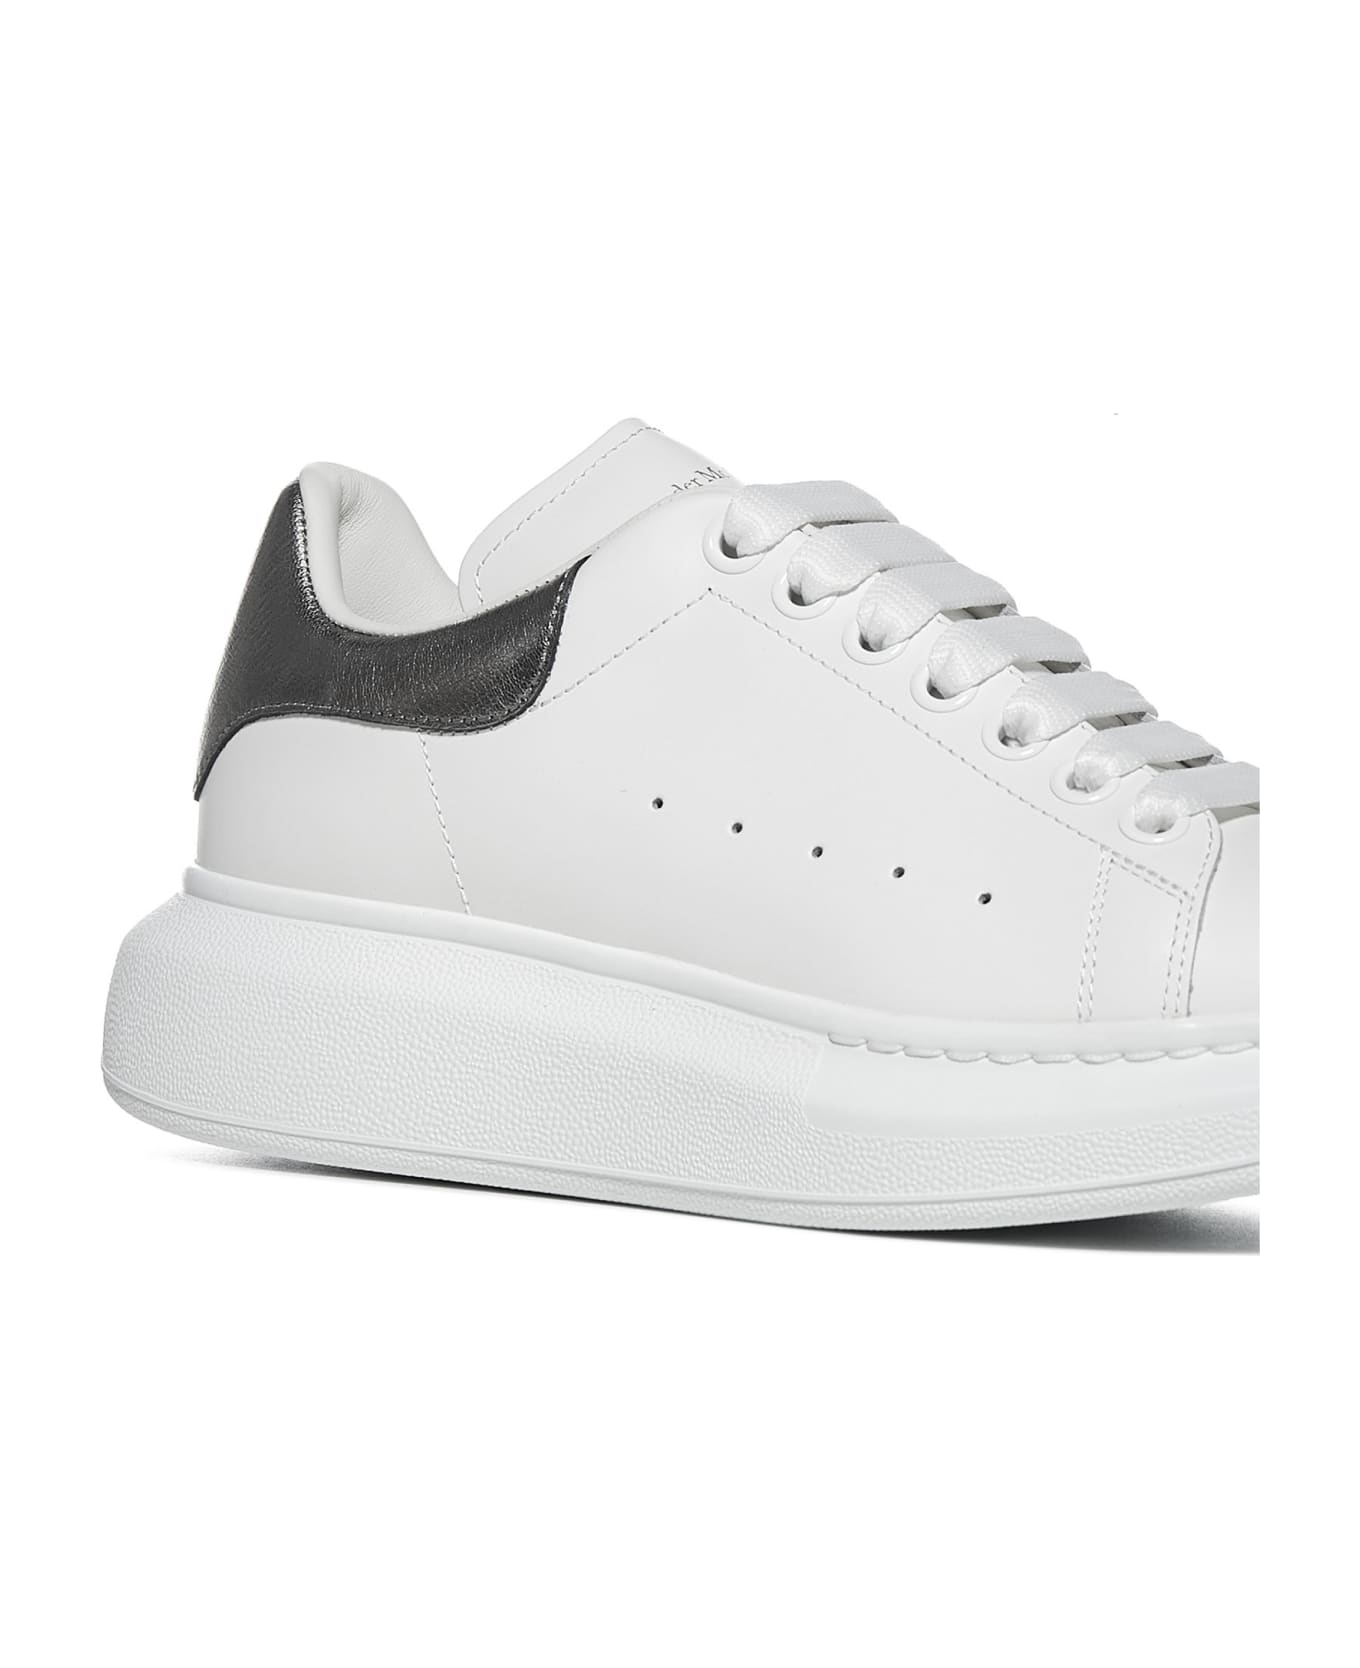 Alexander McQueen Oversized Sneakers In Leather With Contrasting Heel Tab - White/blk Pearl スニーカー